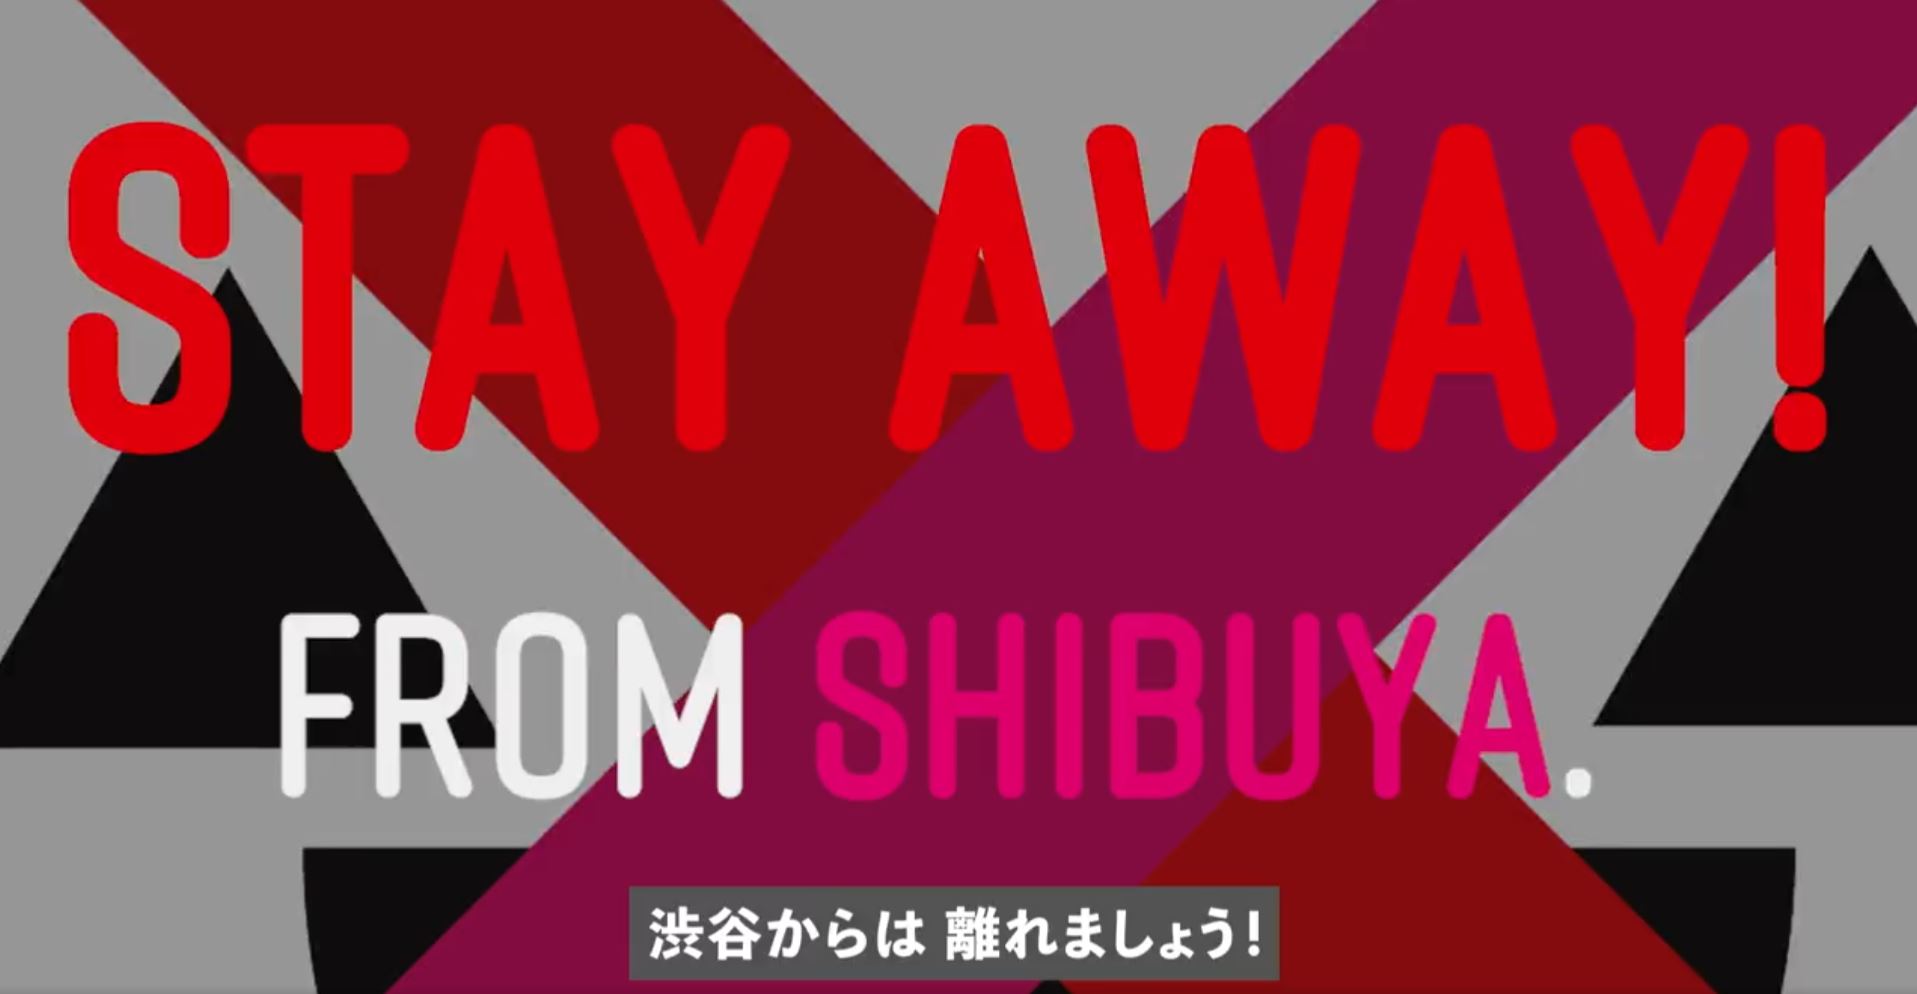 Tokyo Shibuya ward’s cryptic video yelling at foreigners to “STAY AWAY”!” for Halloween causes more harm than good 